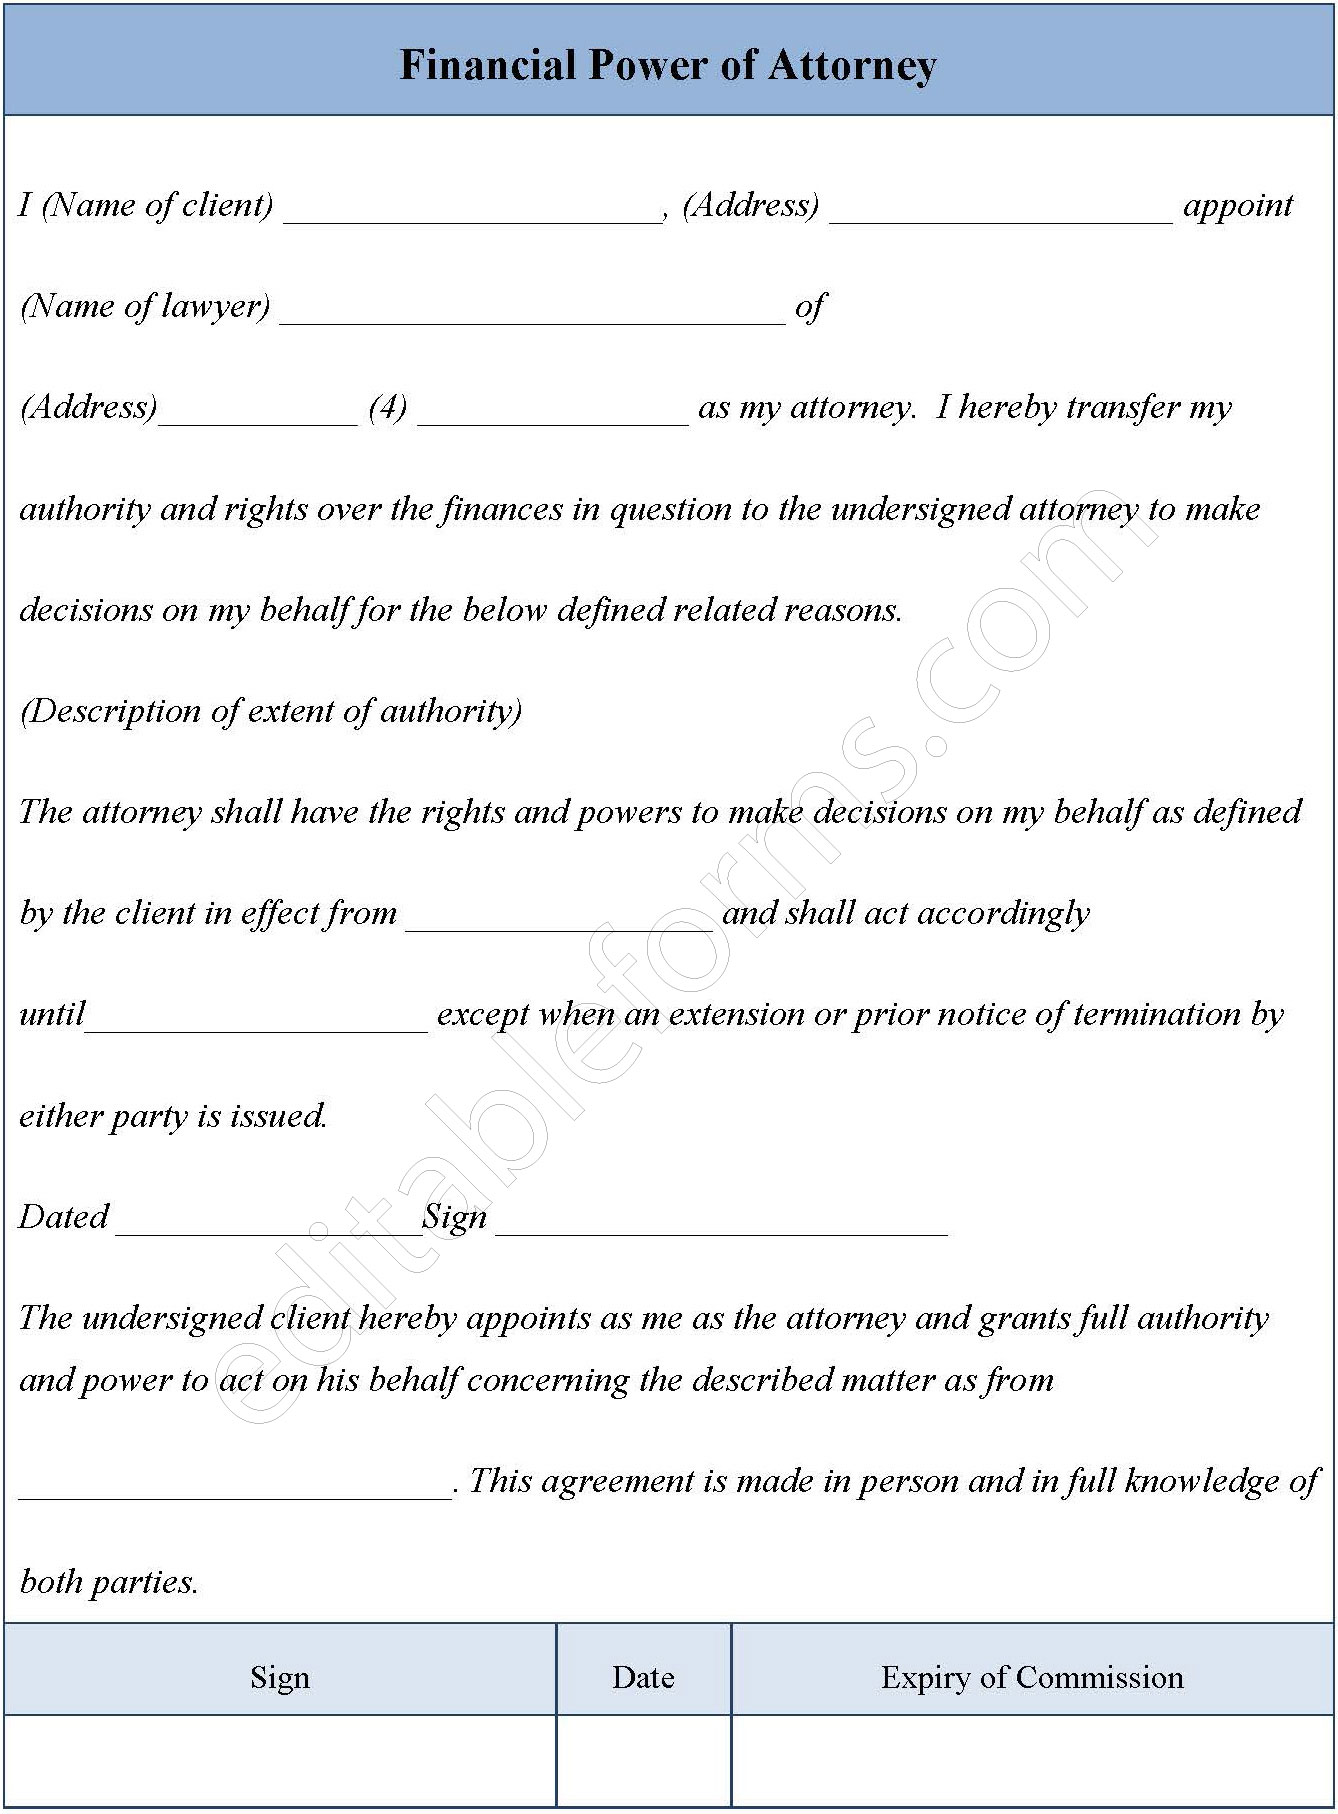 Financial Power of Attorney Form